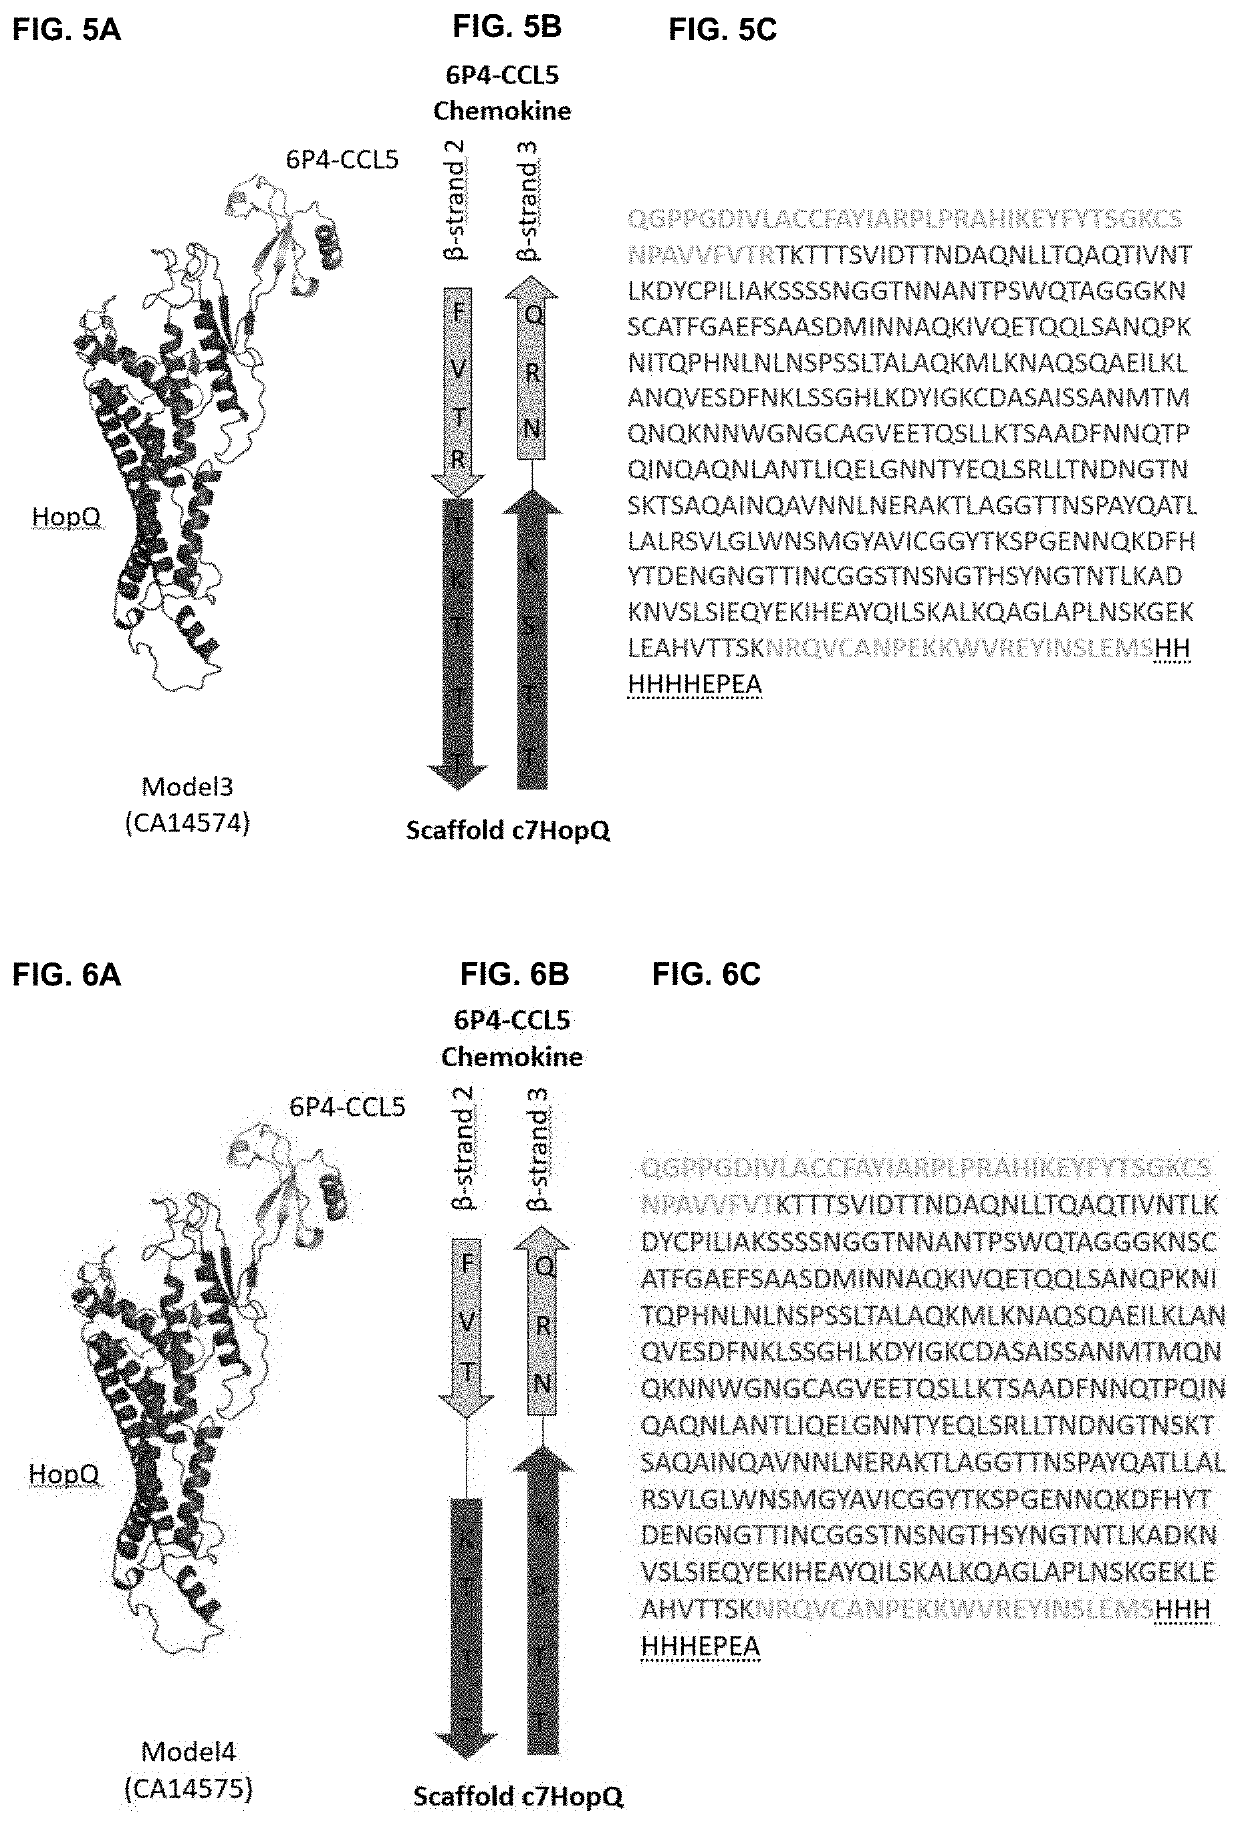 Fusion proteins comprising a cytokine and scaffold protein